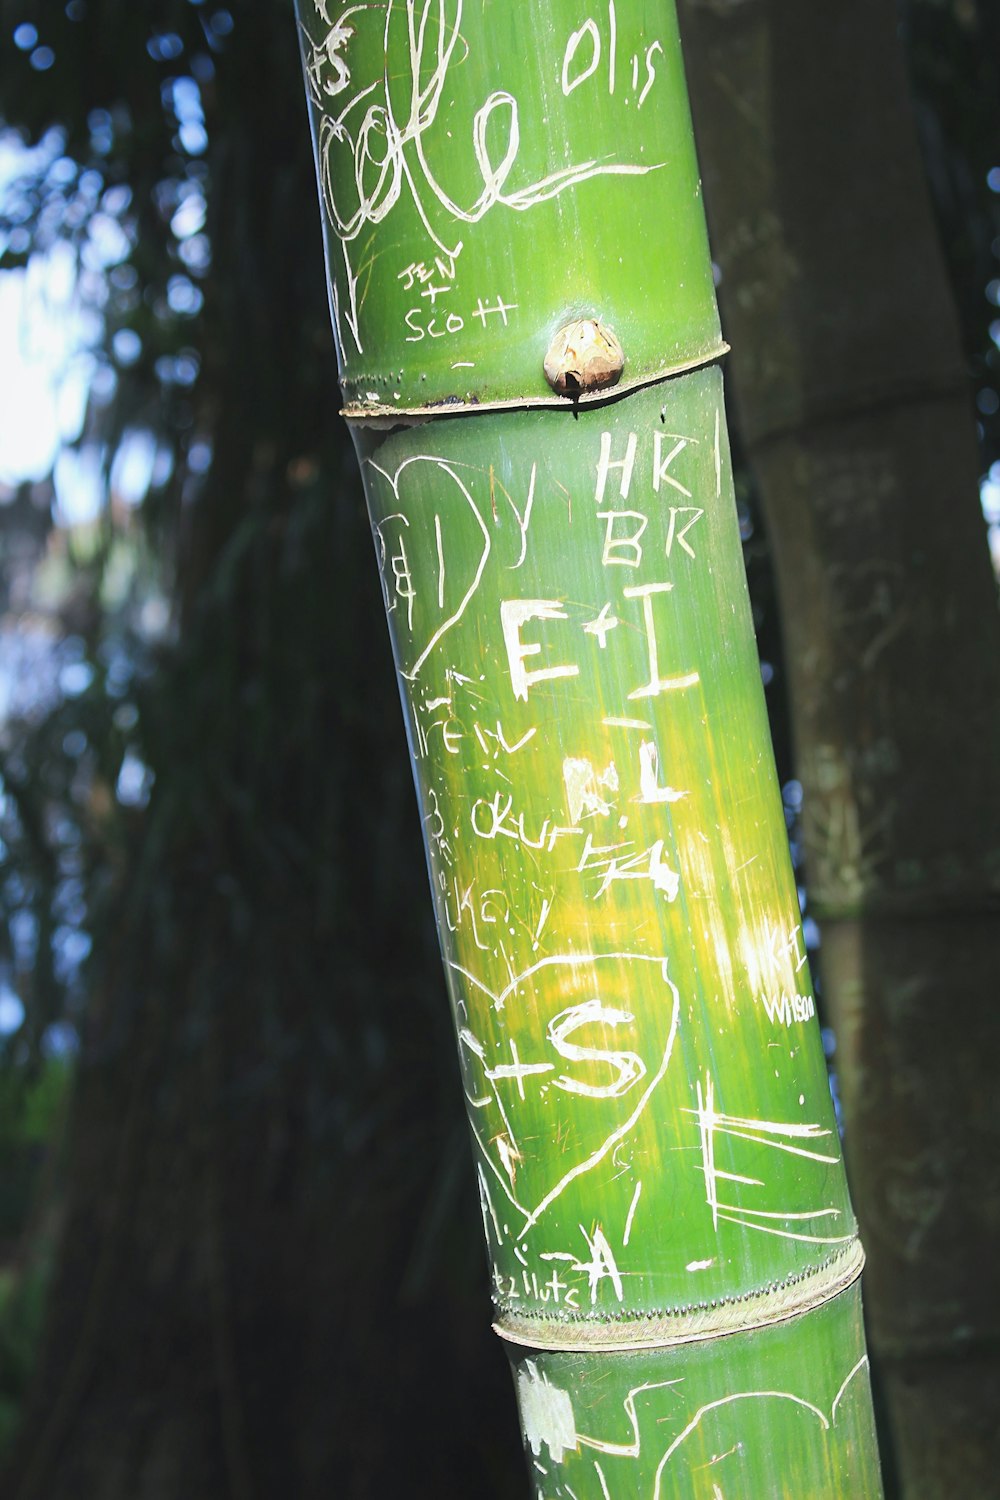 a close up of a green pole with graffiti on it